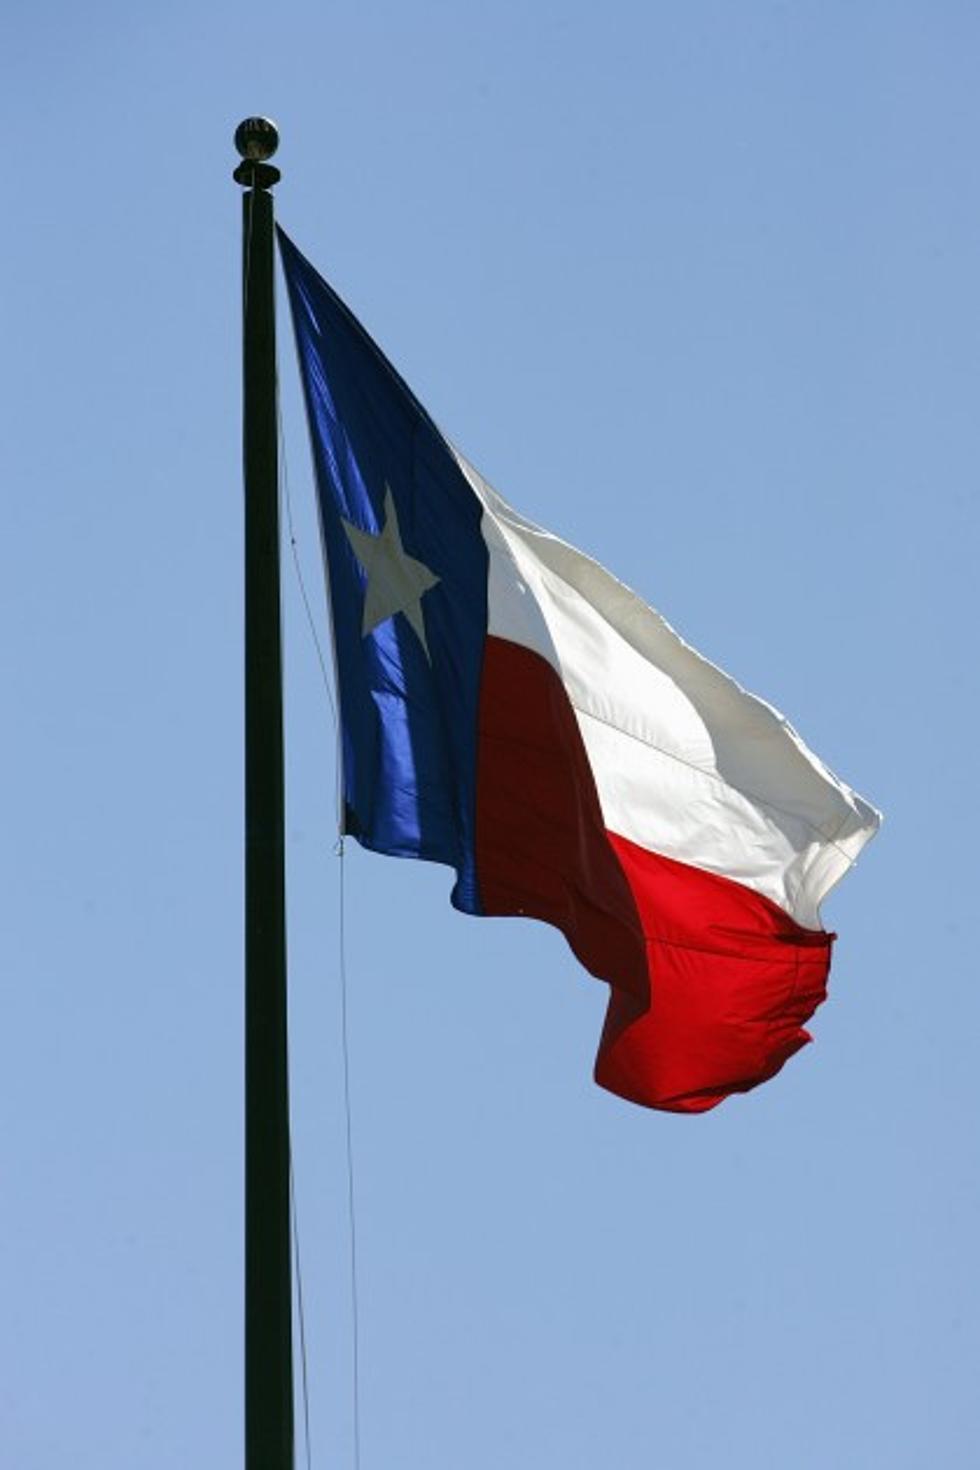 Top 10 New Texas Symbols Approved by Governor Greg Abbott